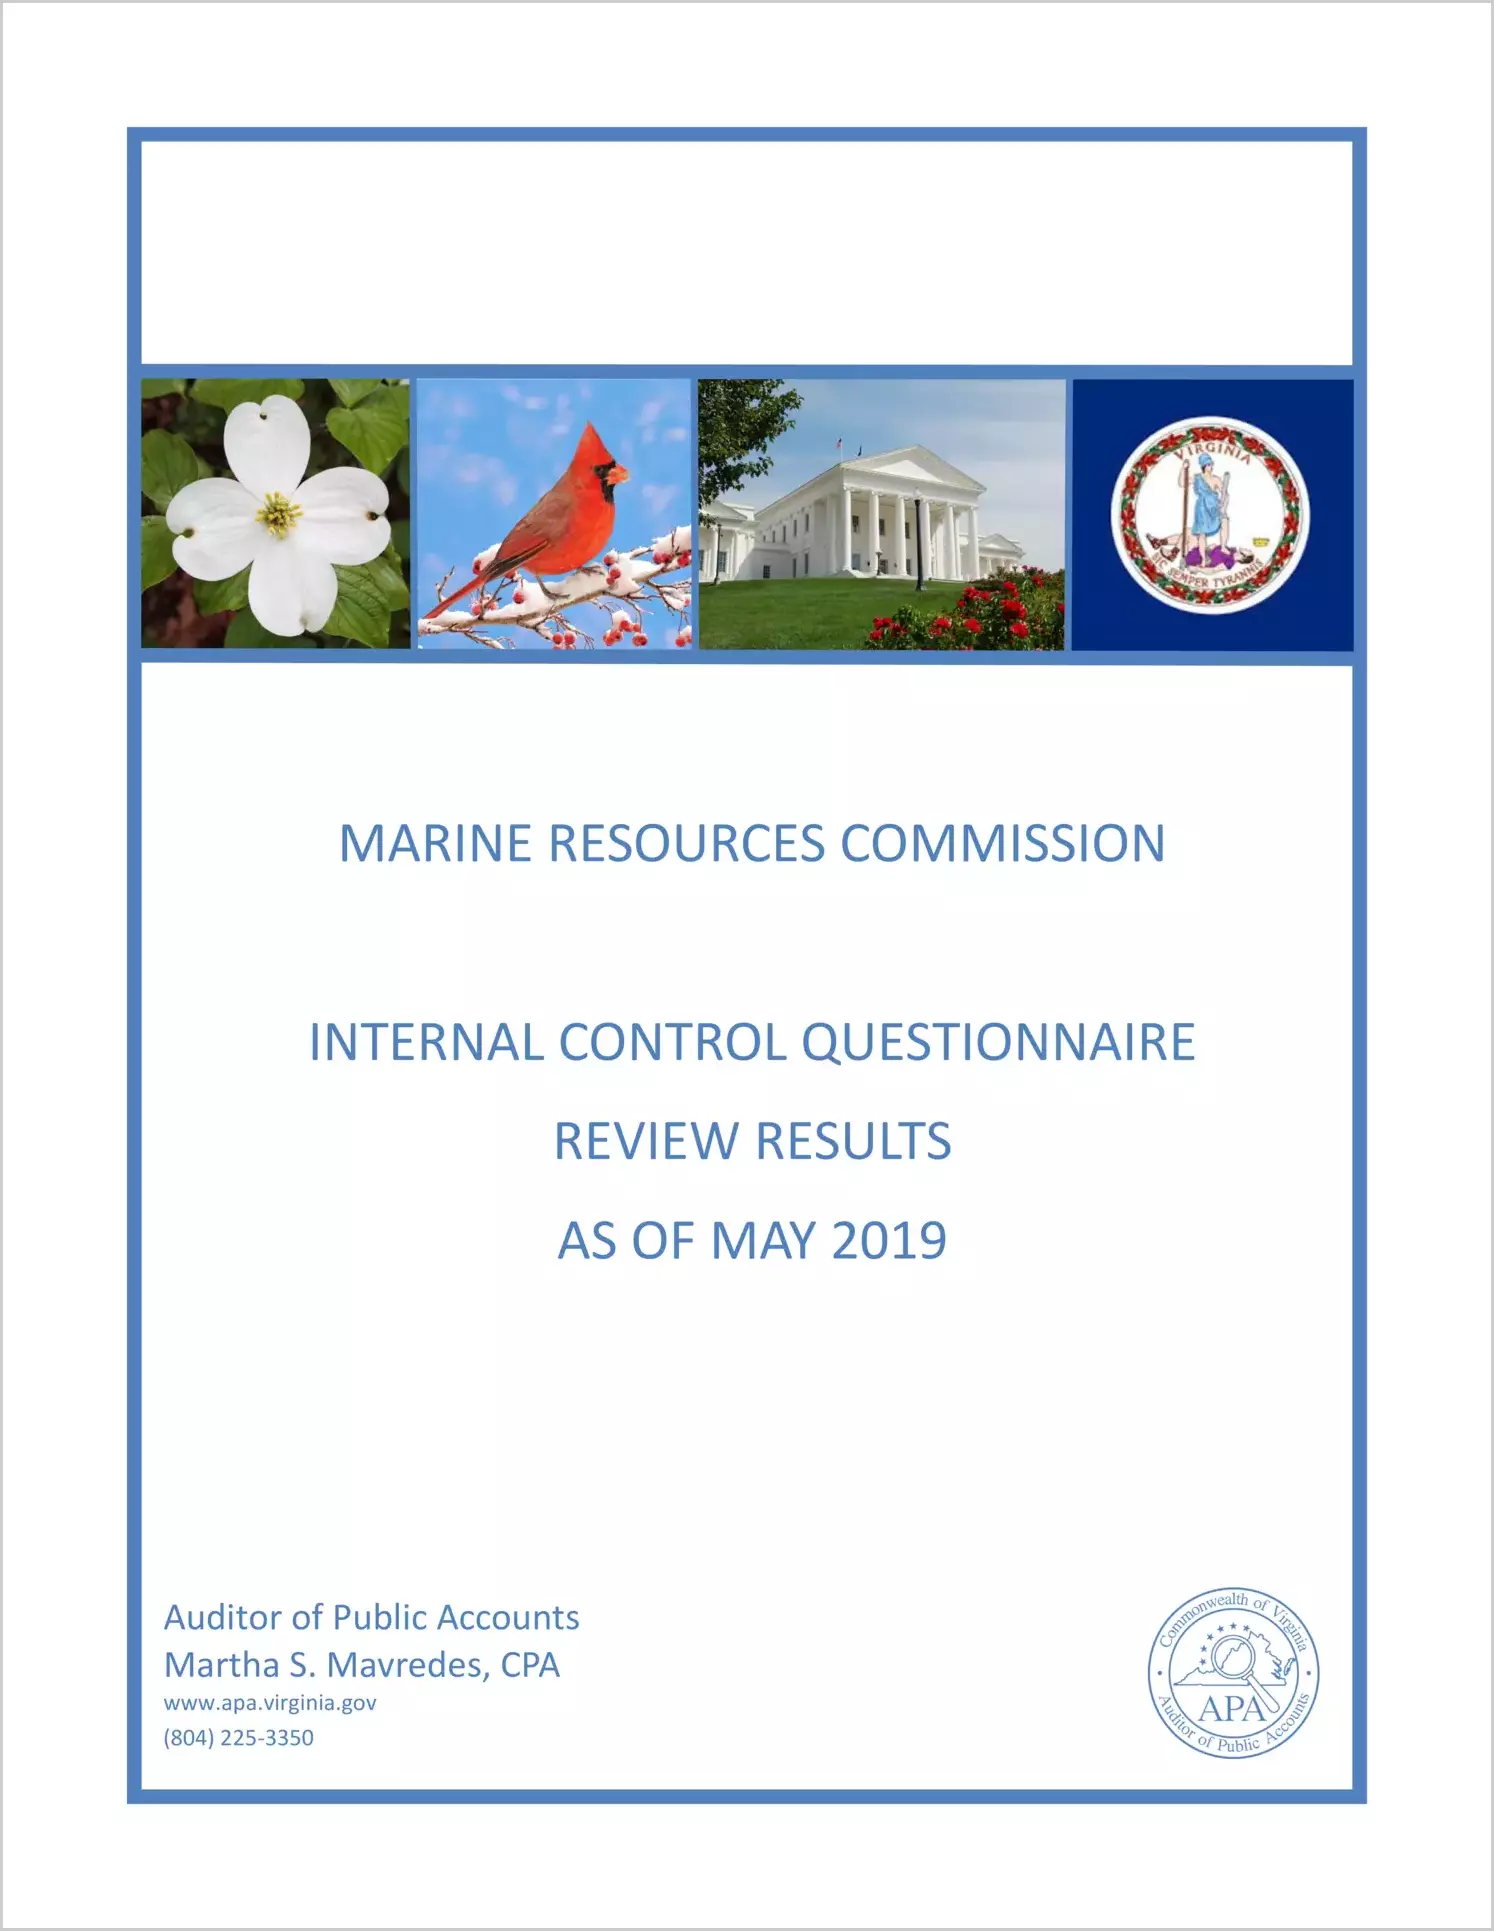 Marine Resources Commission Internal Control Questionnaire Review Results as of May 2019